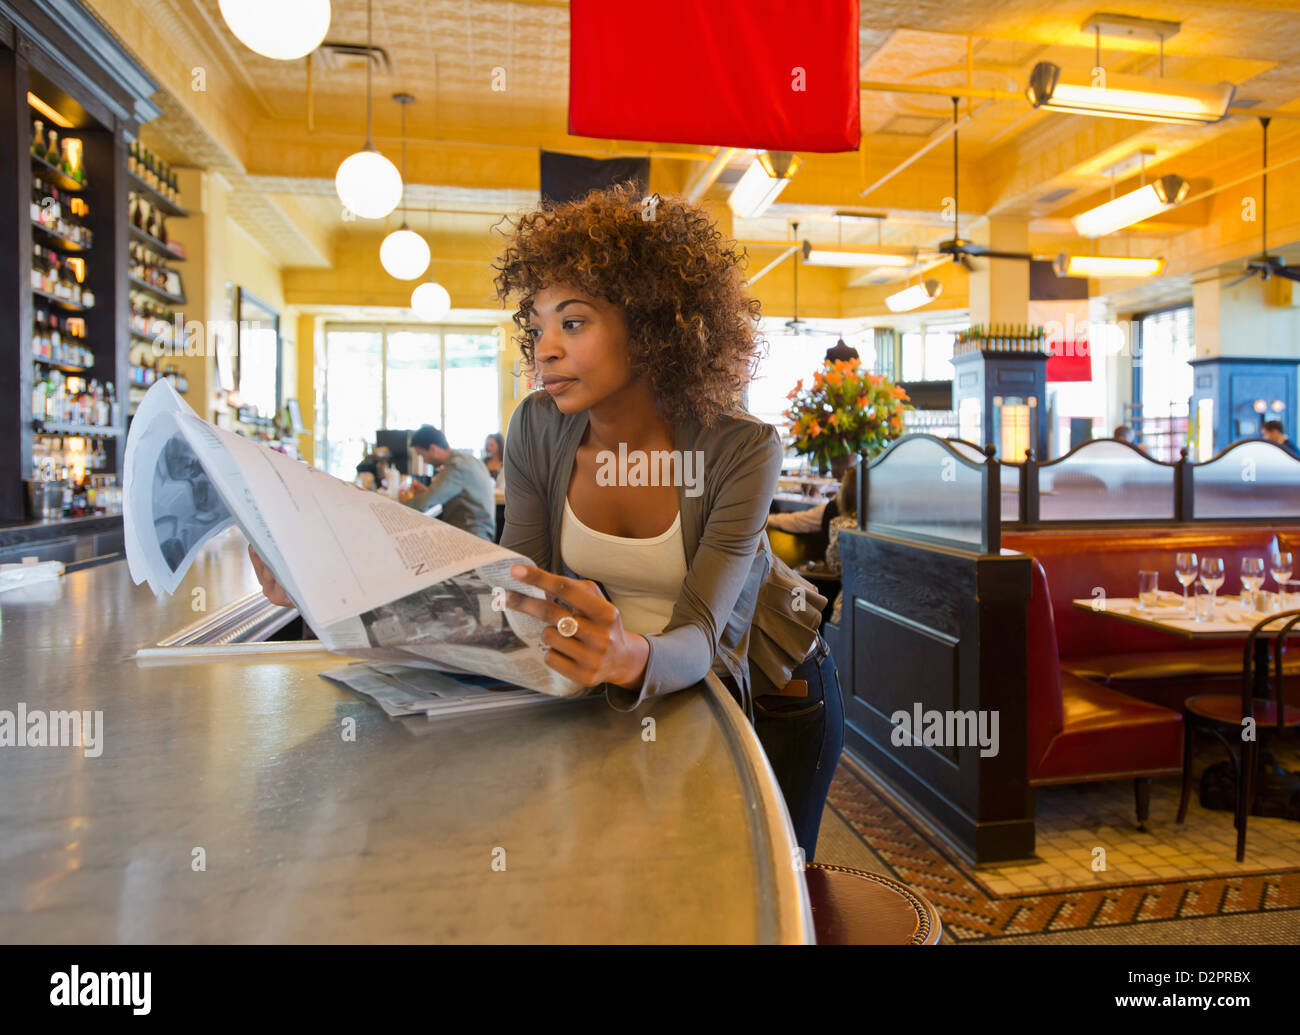 African American woman reading newspaper in cafe Stock Photo